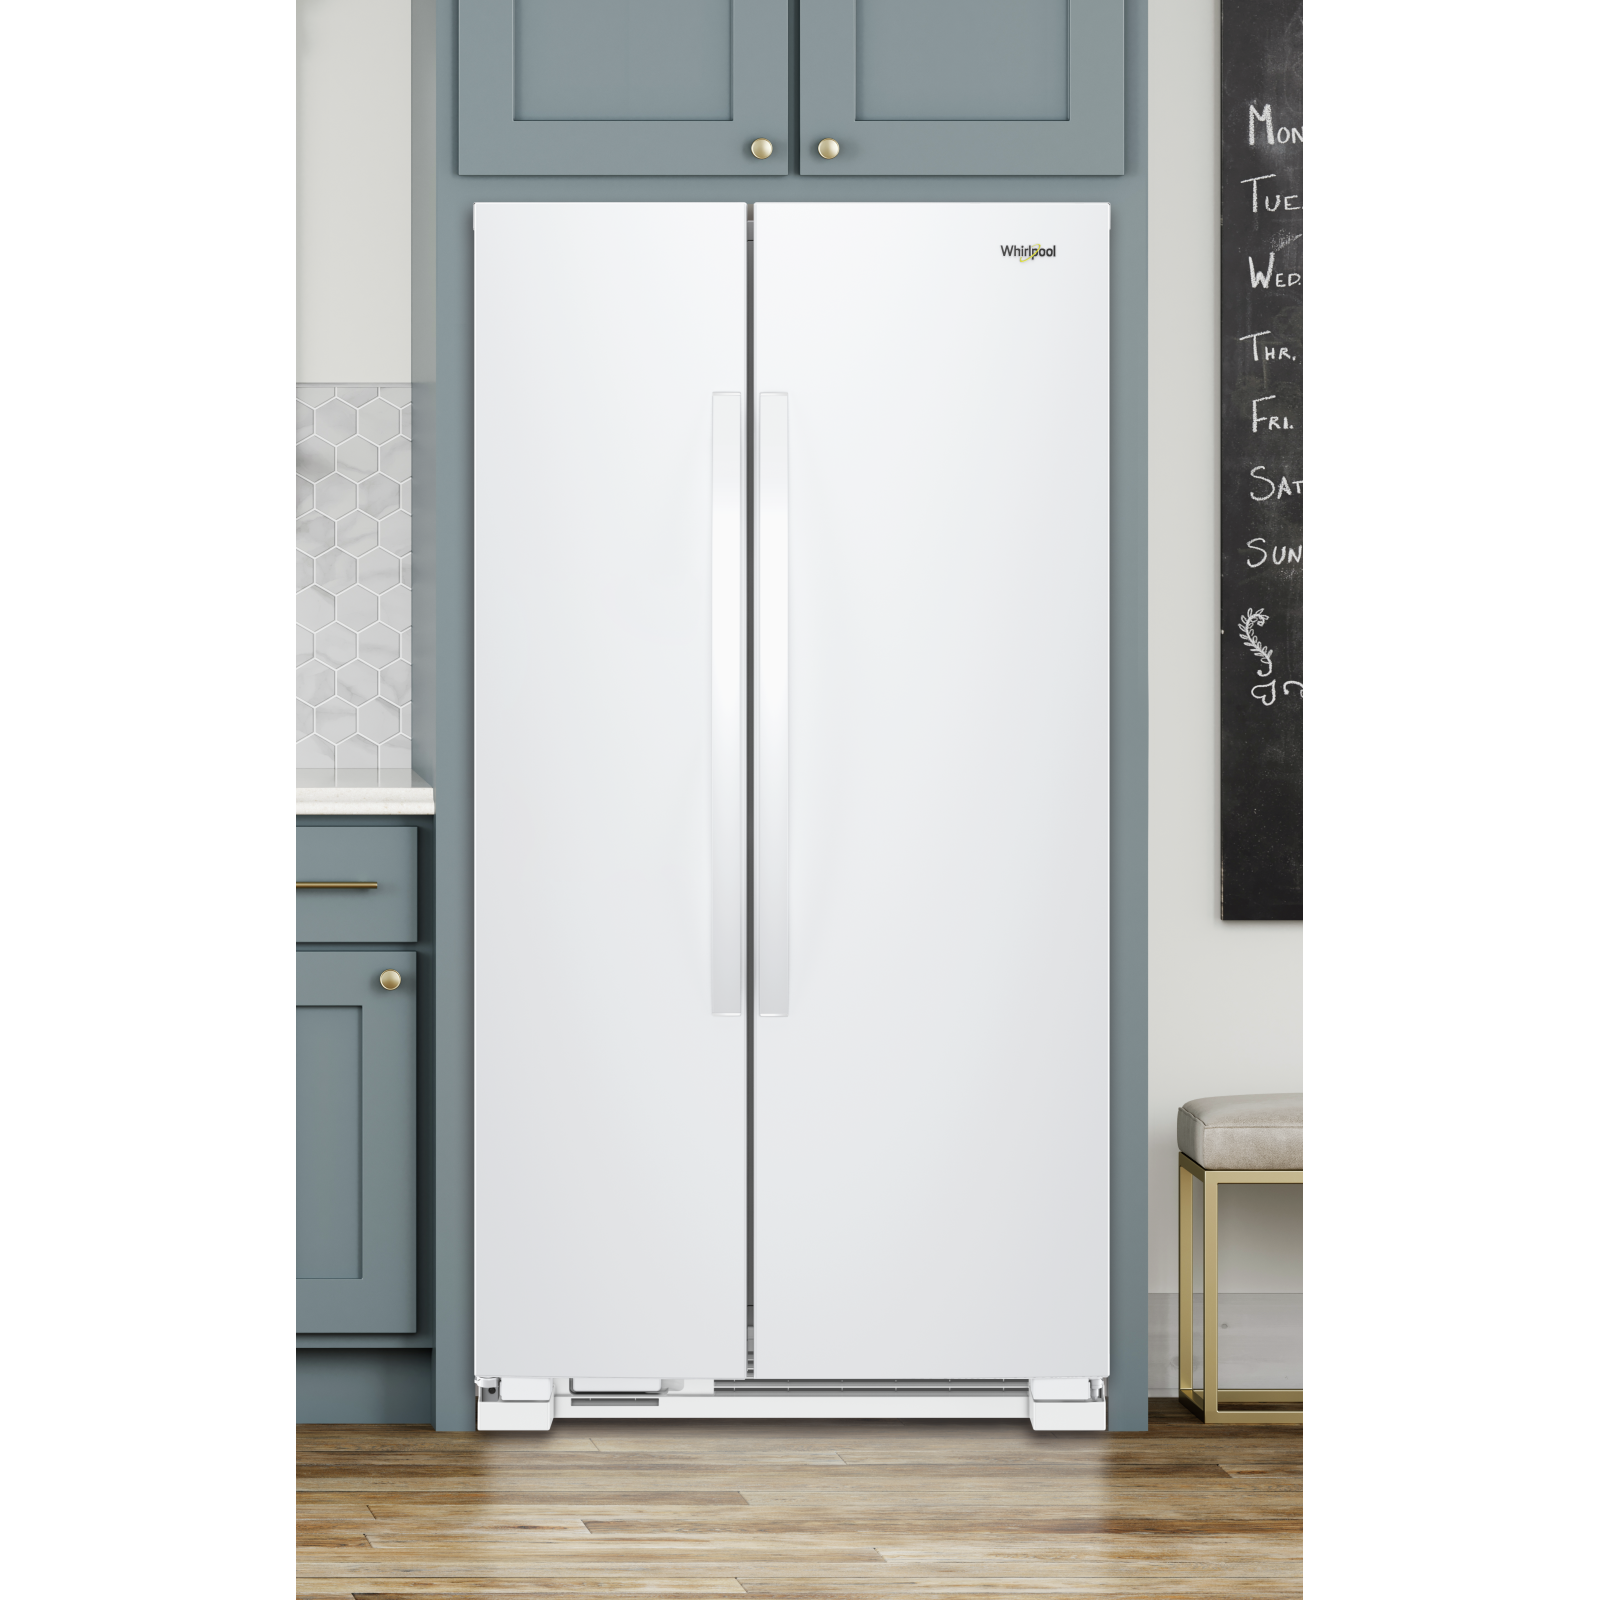 Whirlpool - 35.875 Inch 25 cu. ft Side by Side Refrigerator in White - WRS315SNHW